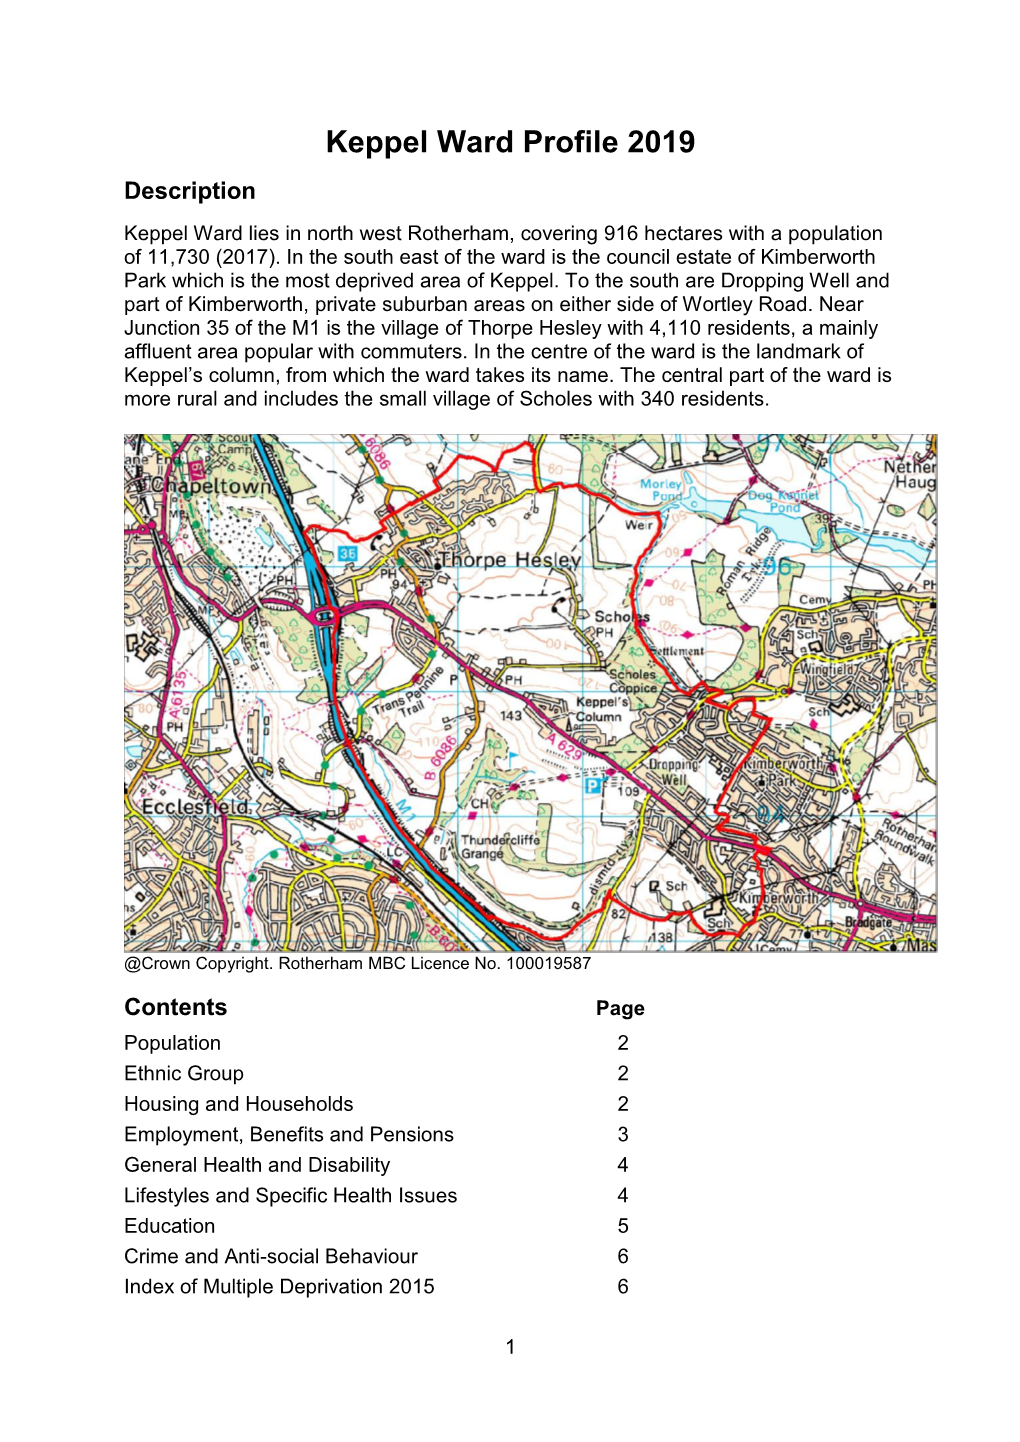 Keppel Ward Profile 2019 Description Keppel Ward Lies in North West Rotherham, Covering 916 Hectares with a Population of 11,730 (2017)